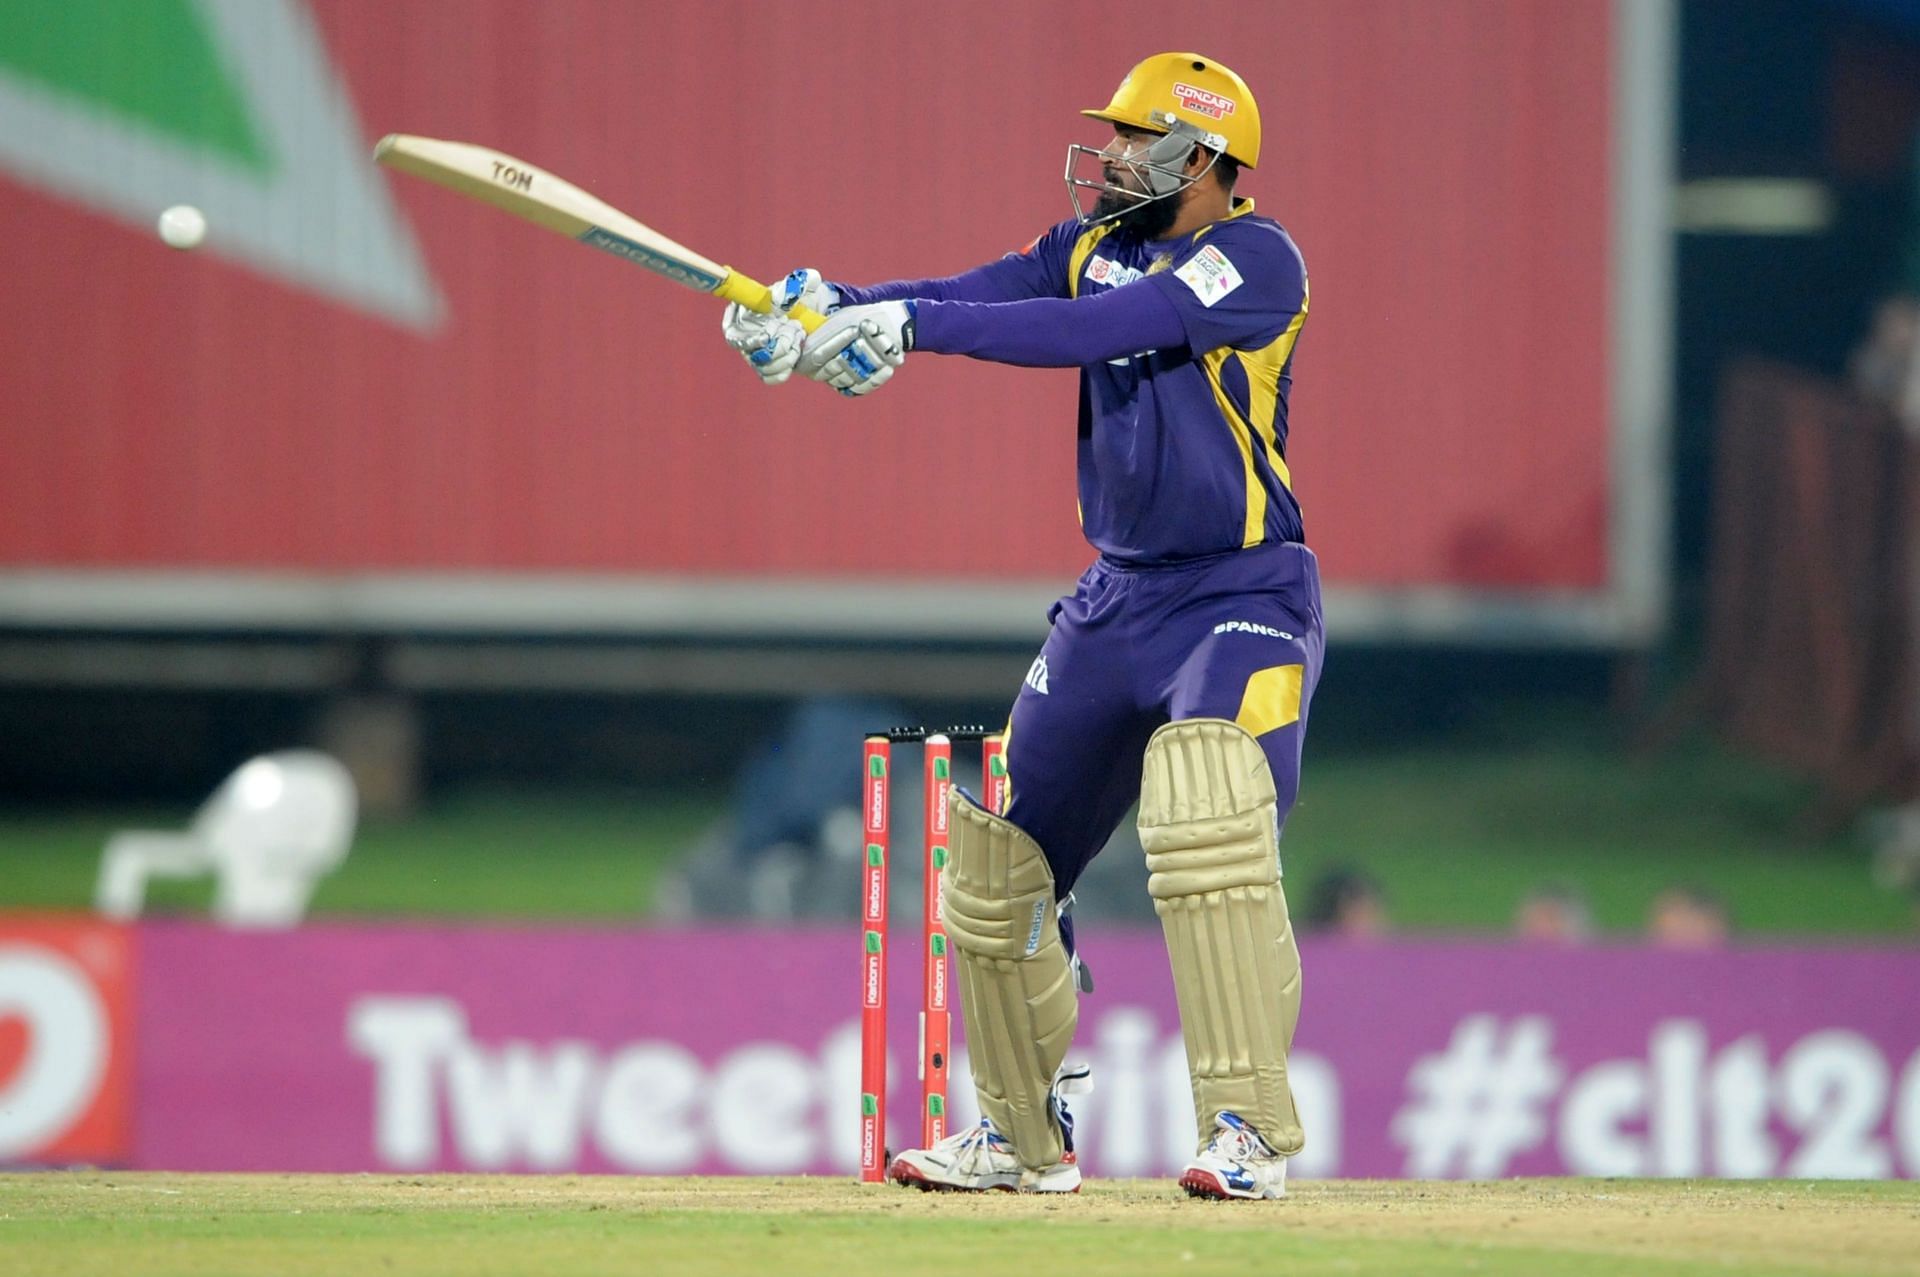 Yusuf Pathan smashed a fifty off just 15 balls against Sunrisers Hyderabad (Image courtesy: Getty Images)